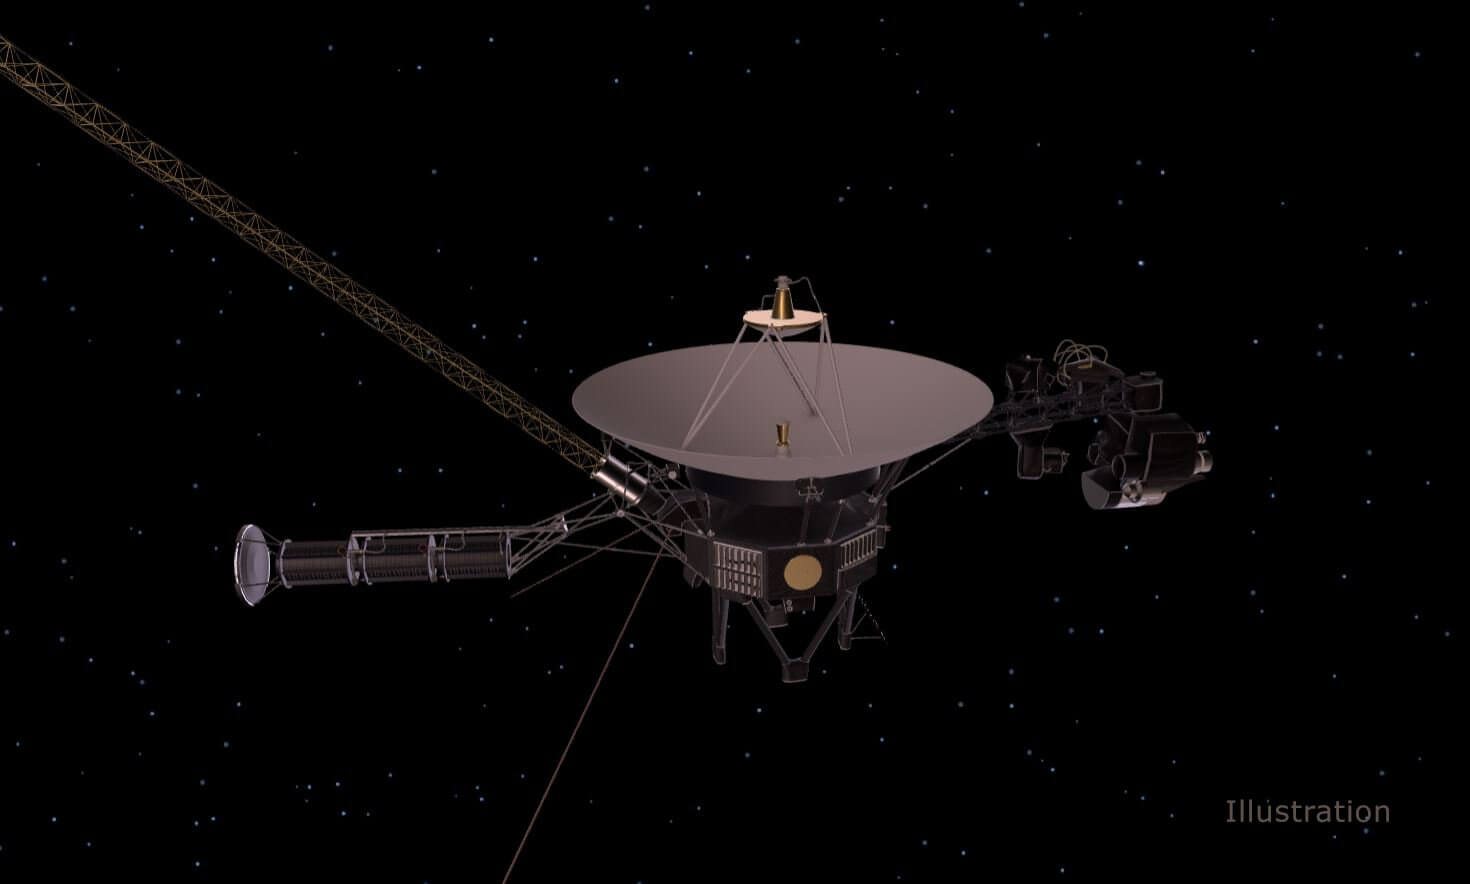 NASA’s Triumph: Voyager 1 Communication Restored in Historic Space Exploration Moment